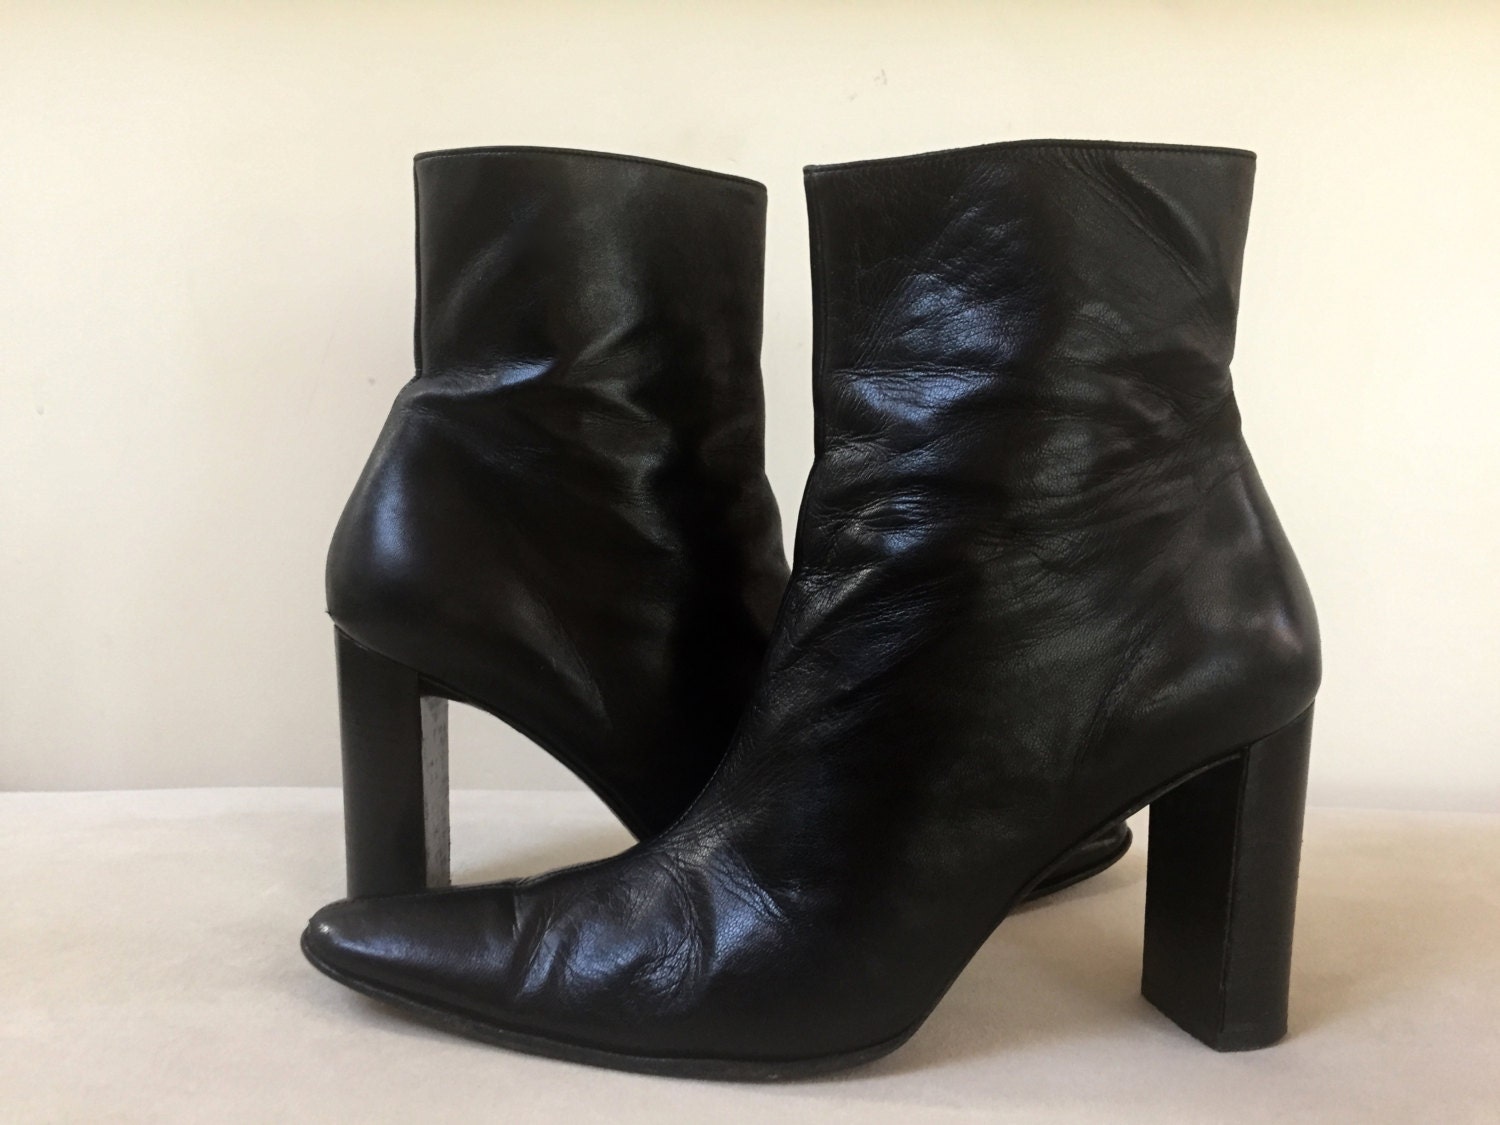 Vintage black leather women's half boots booties ankle